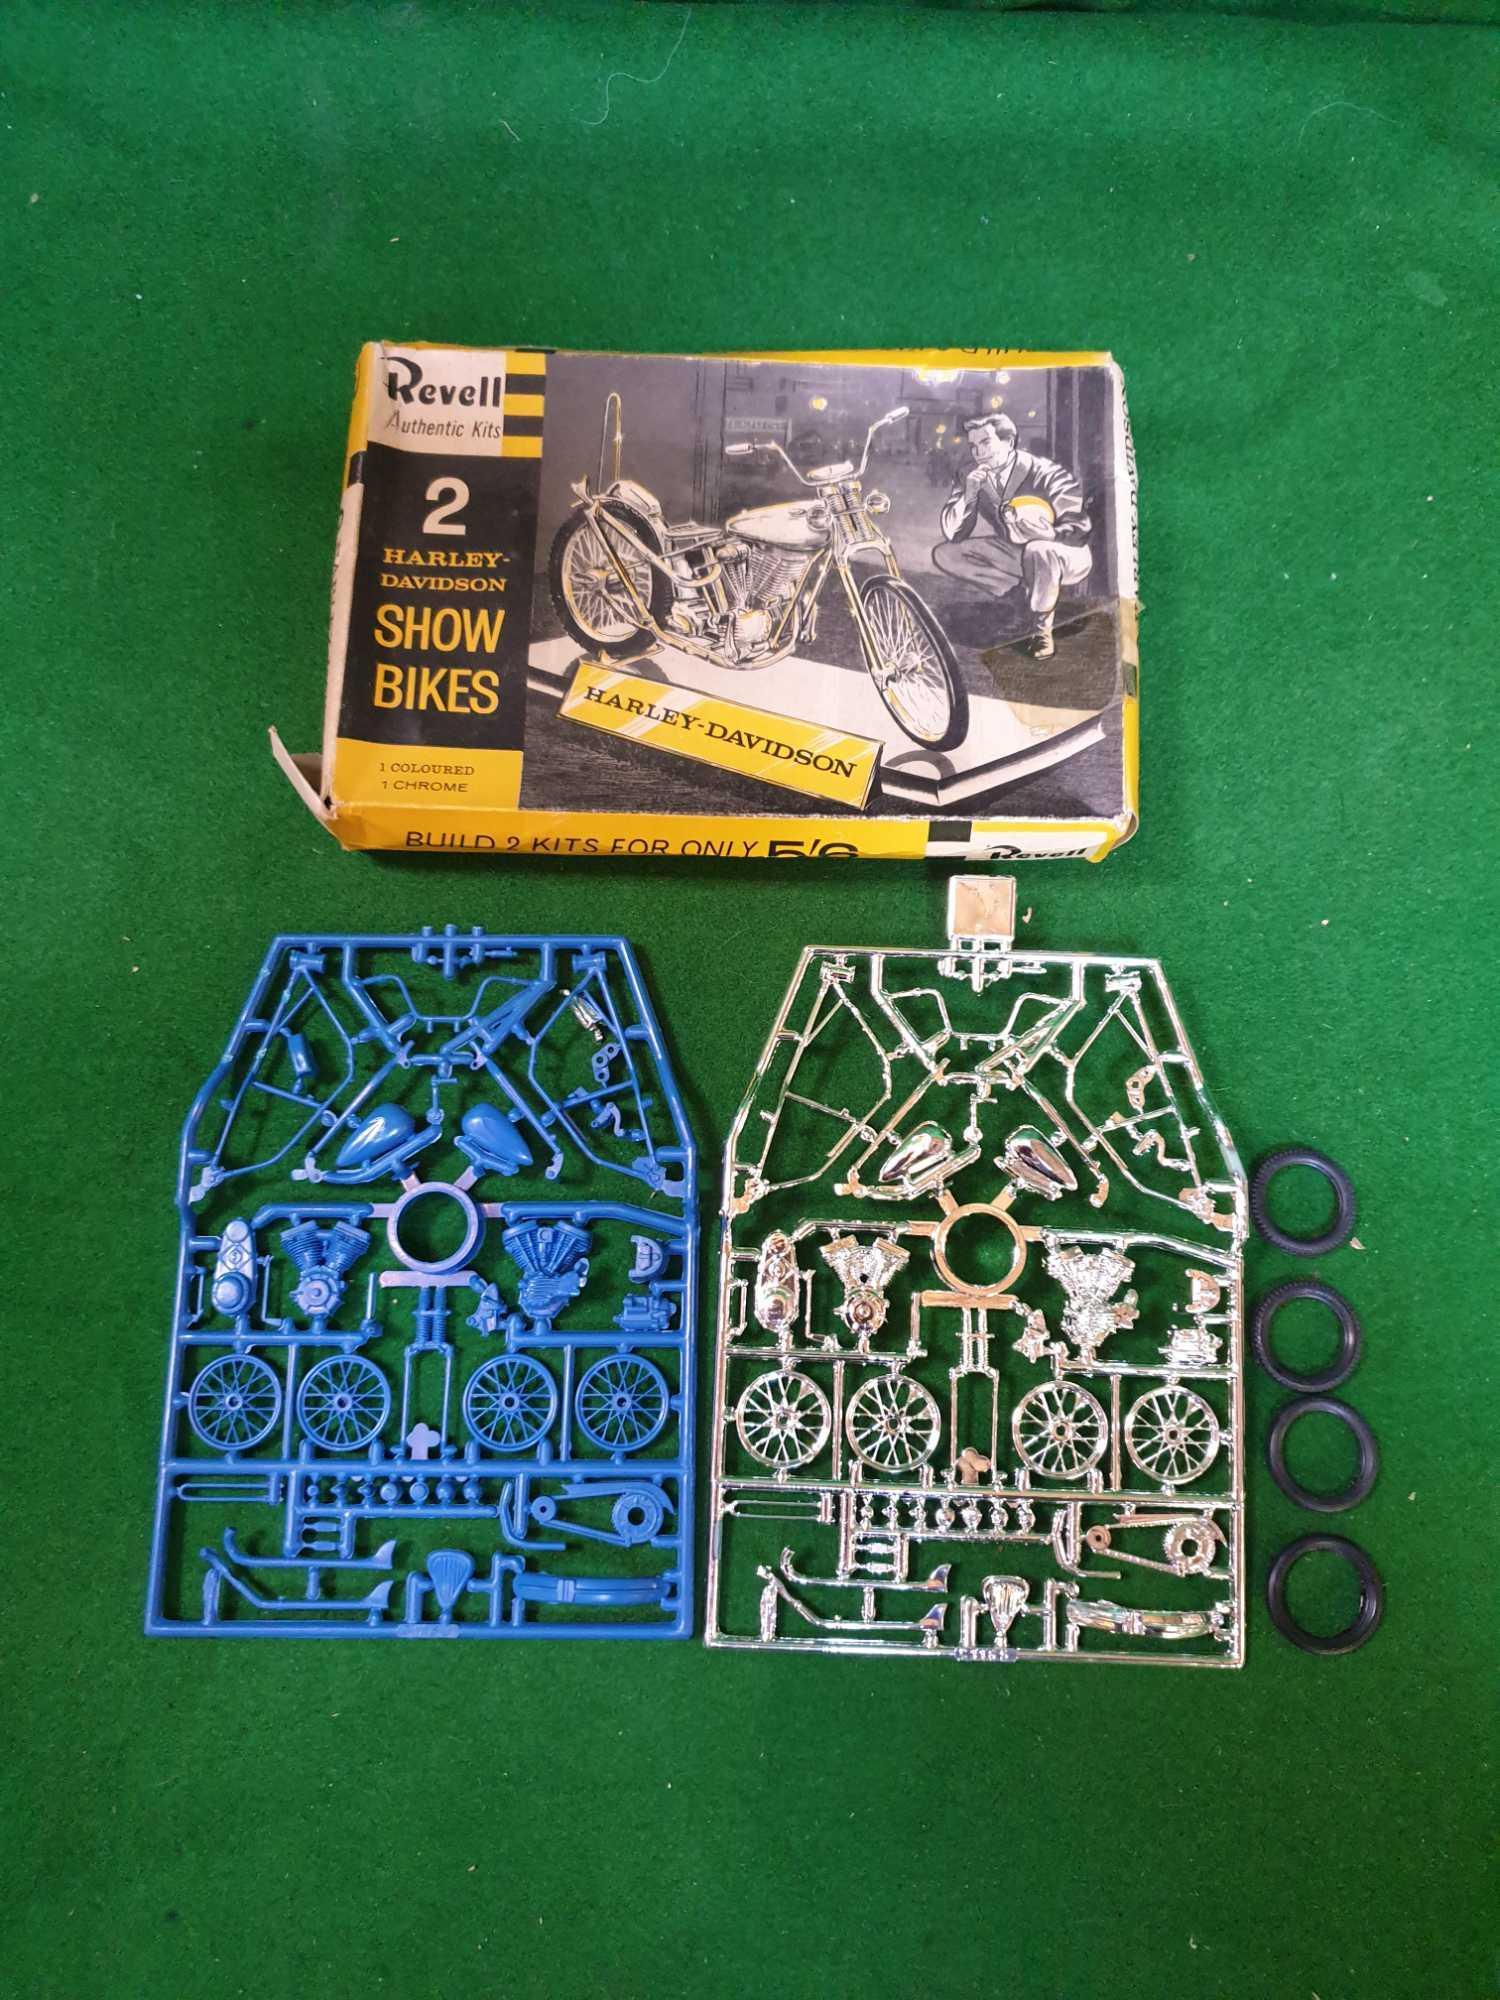 Revell Great Britain Very Rare # H-1292 1:25 Scale 2 Show Bikes Harley Davidson Still On Sprues - Image 3 of 3